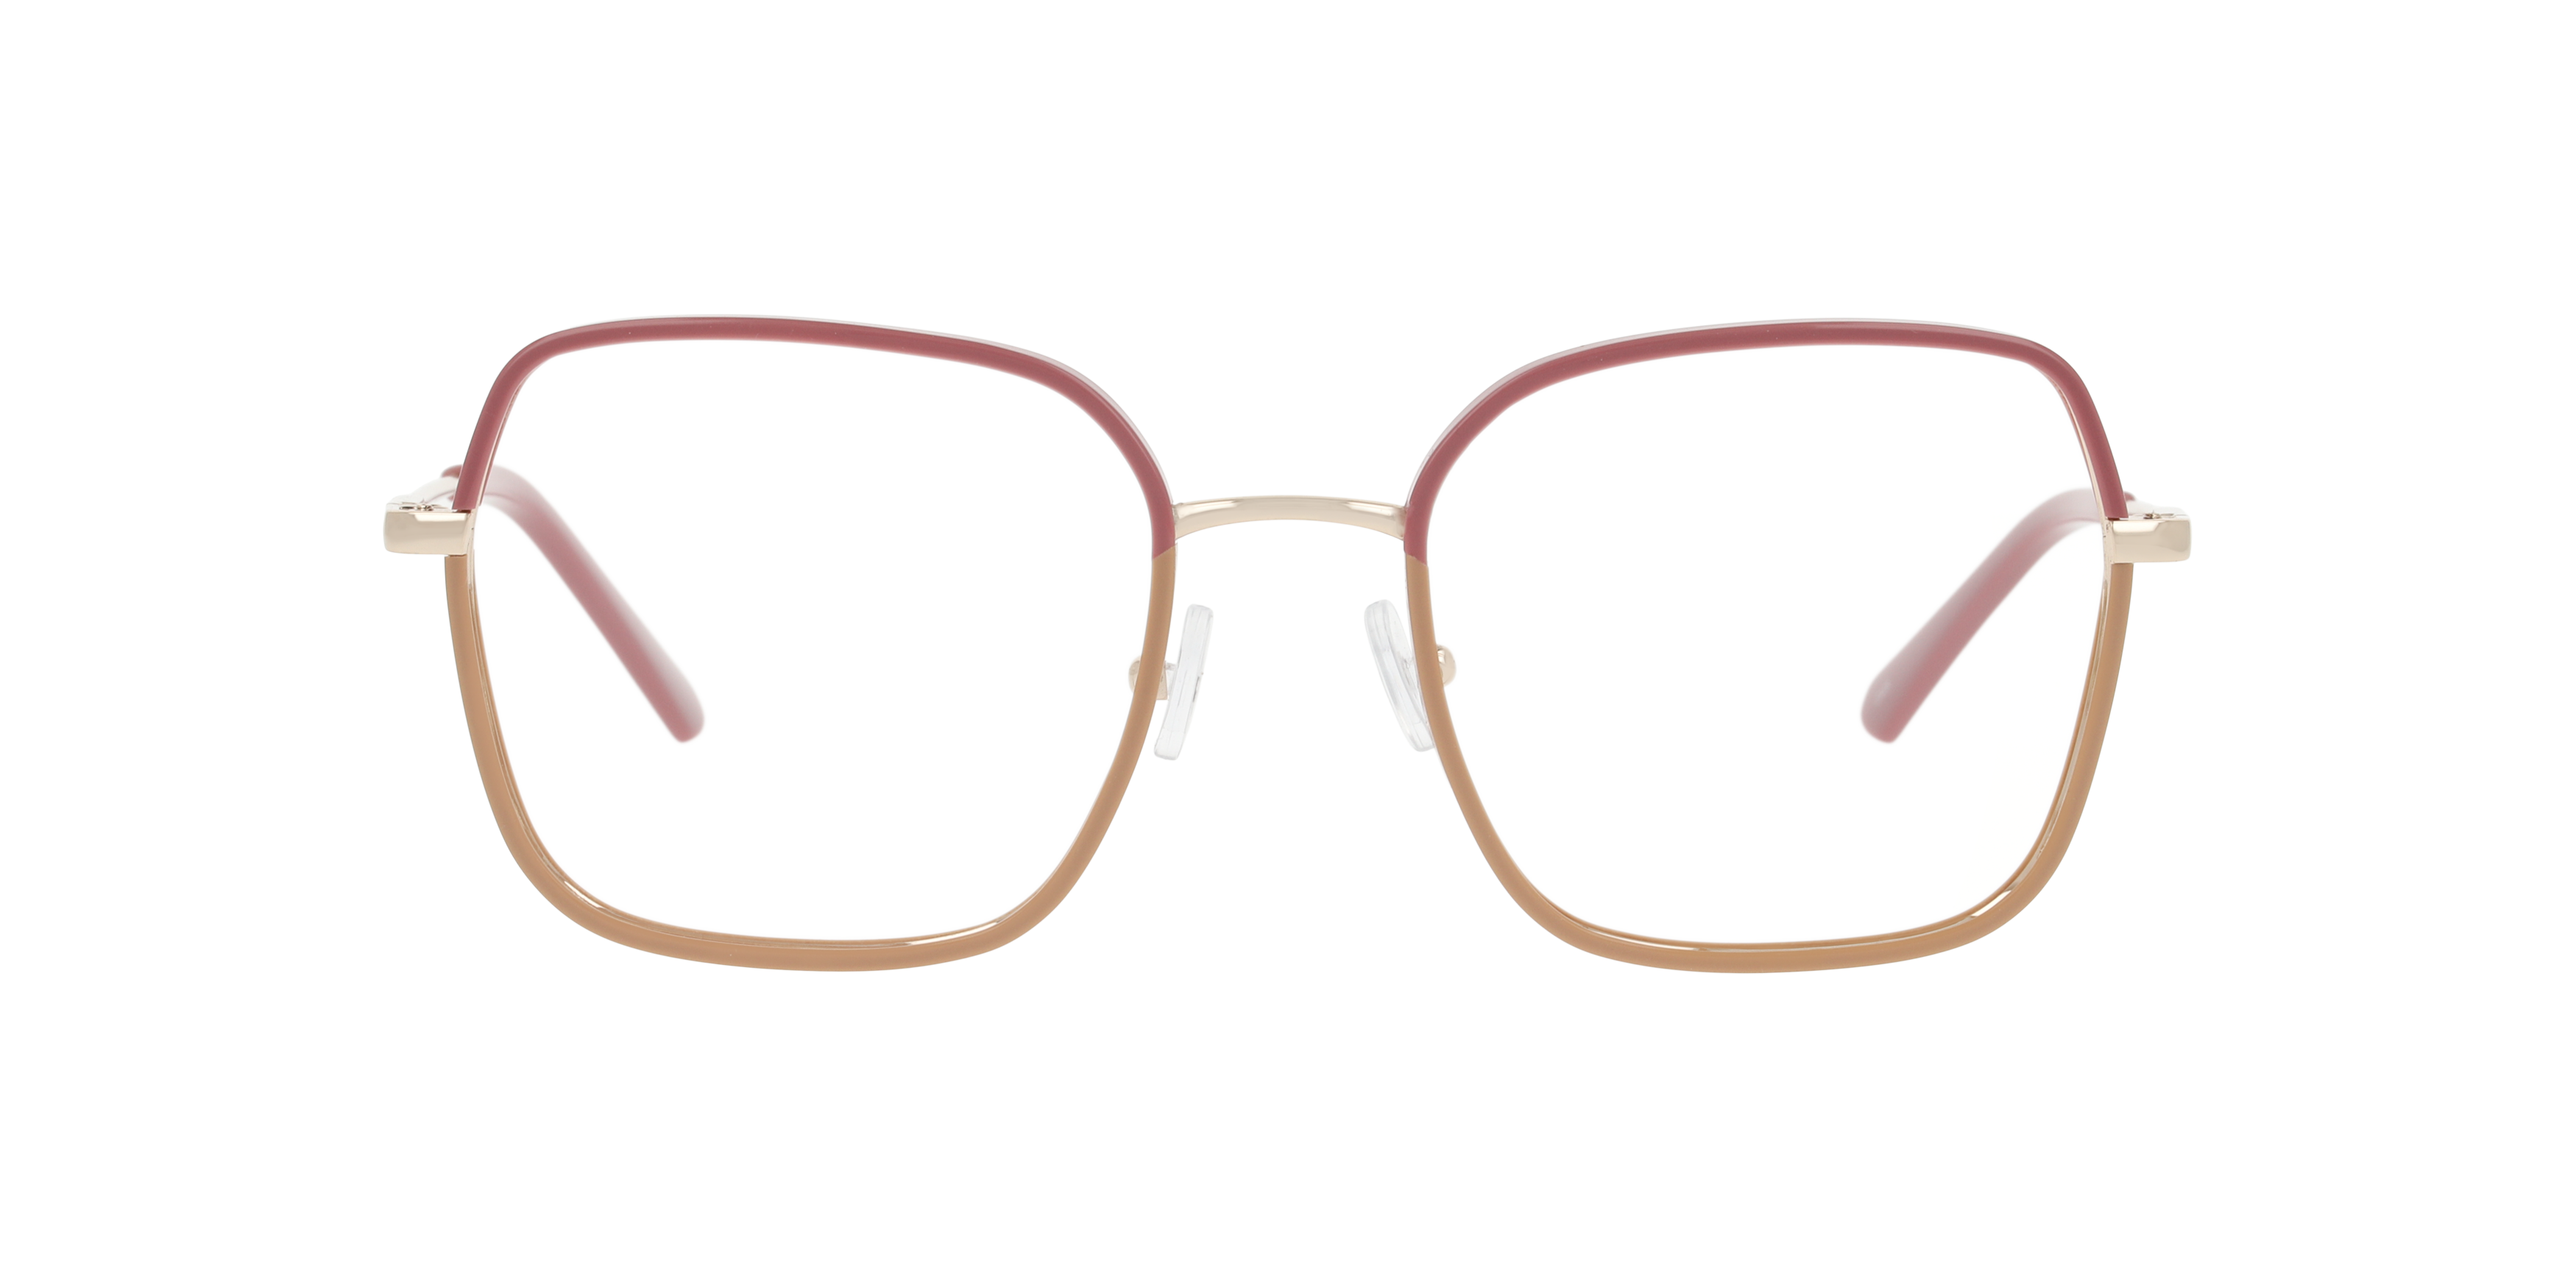 Front Unofficial UO1169 Glasses Transparent / Gold